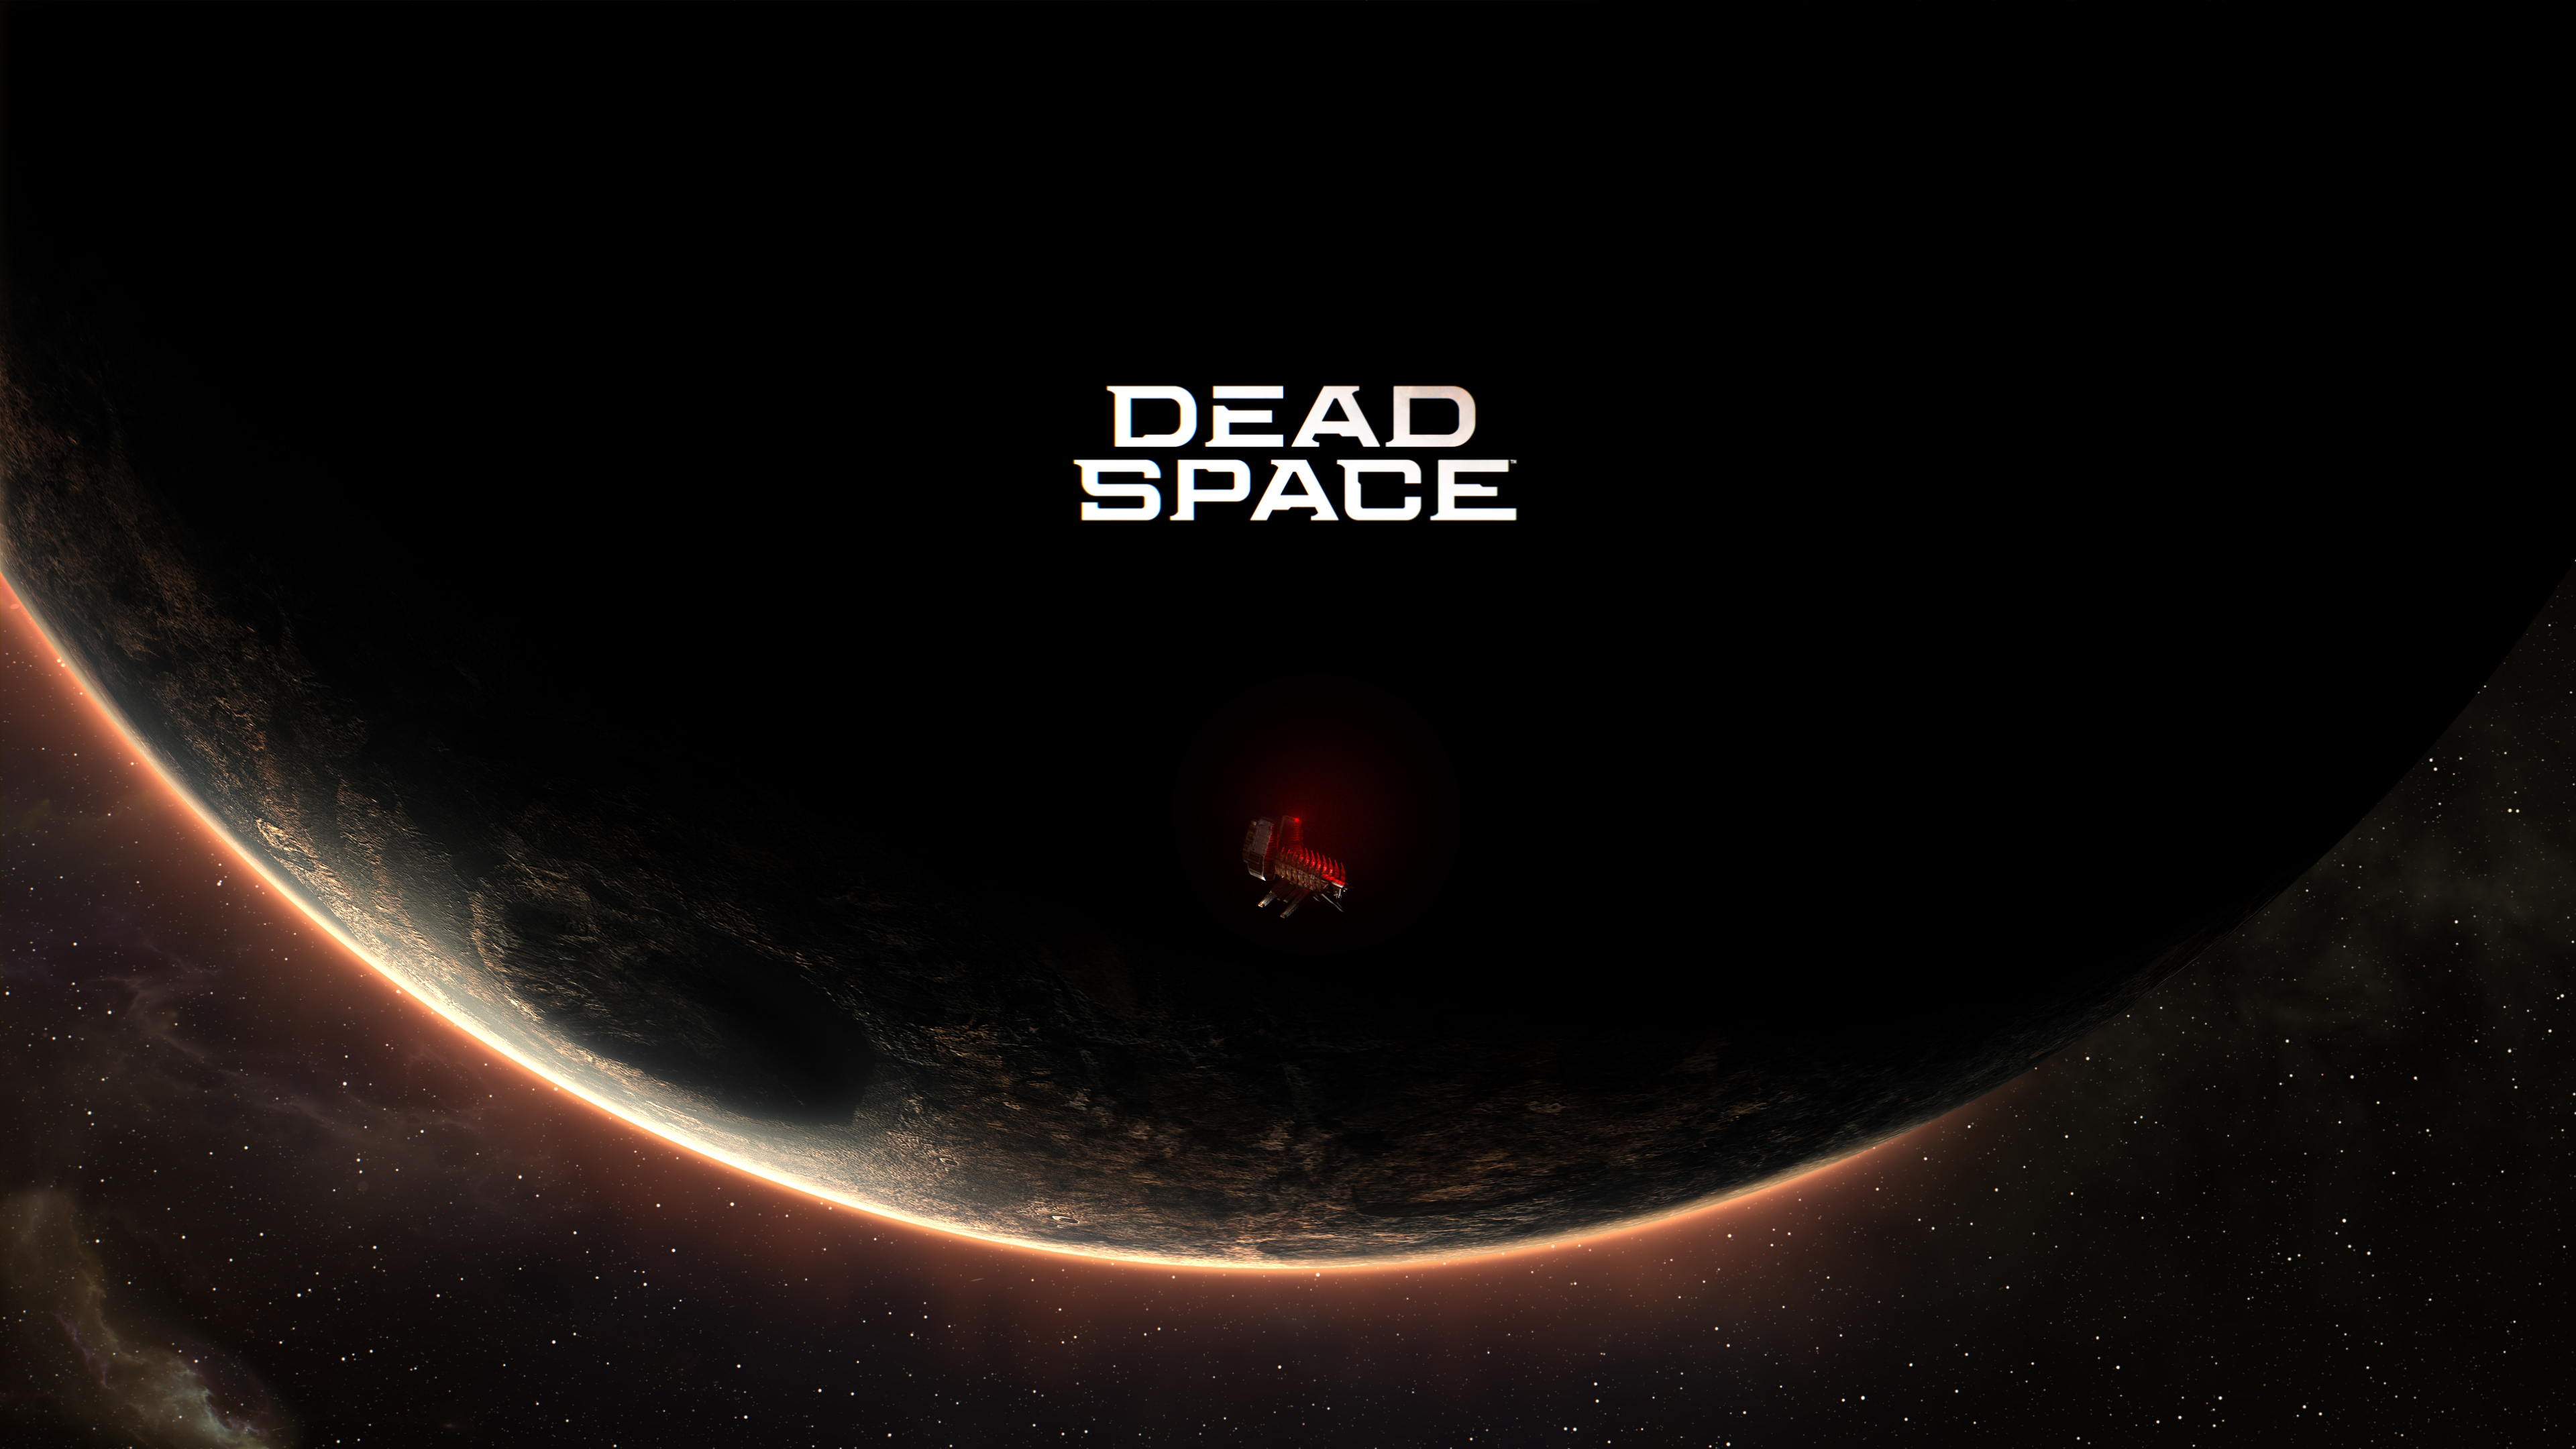 Dead space hd papers and backgrounds